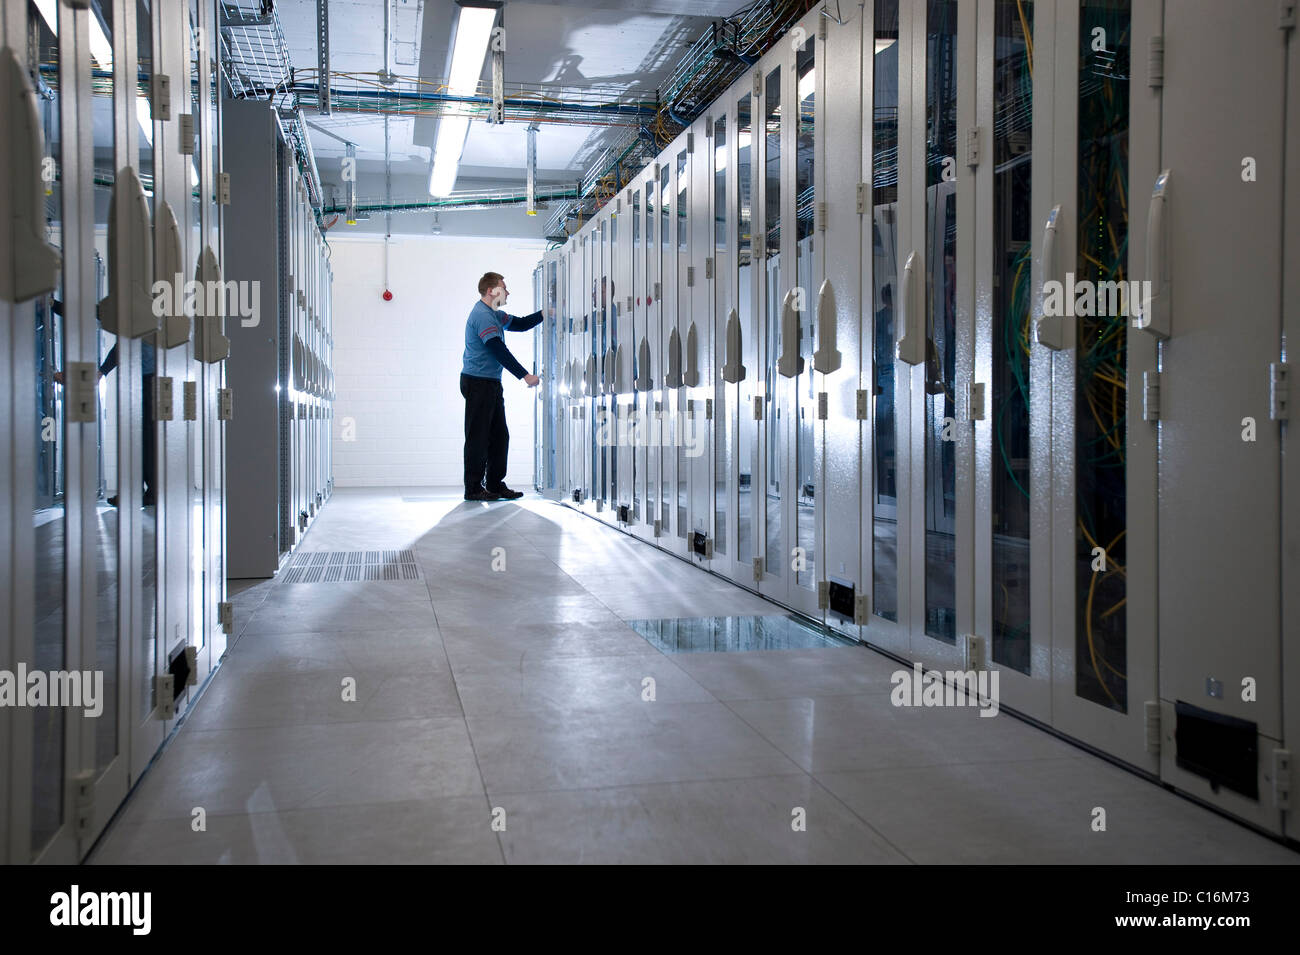 Mainframes, computer cluster at the Max Planck Institute for Gravitational Physics, Hanover, Germany, Europe Stock Photo